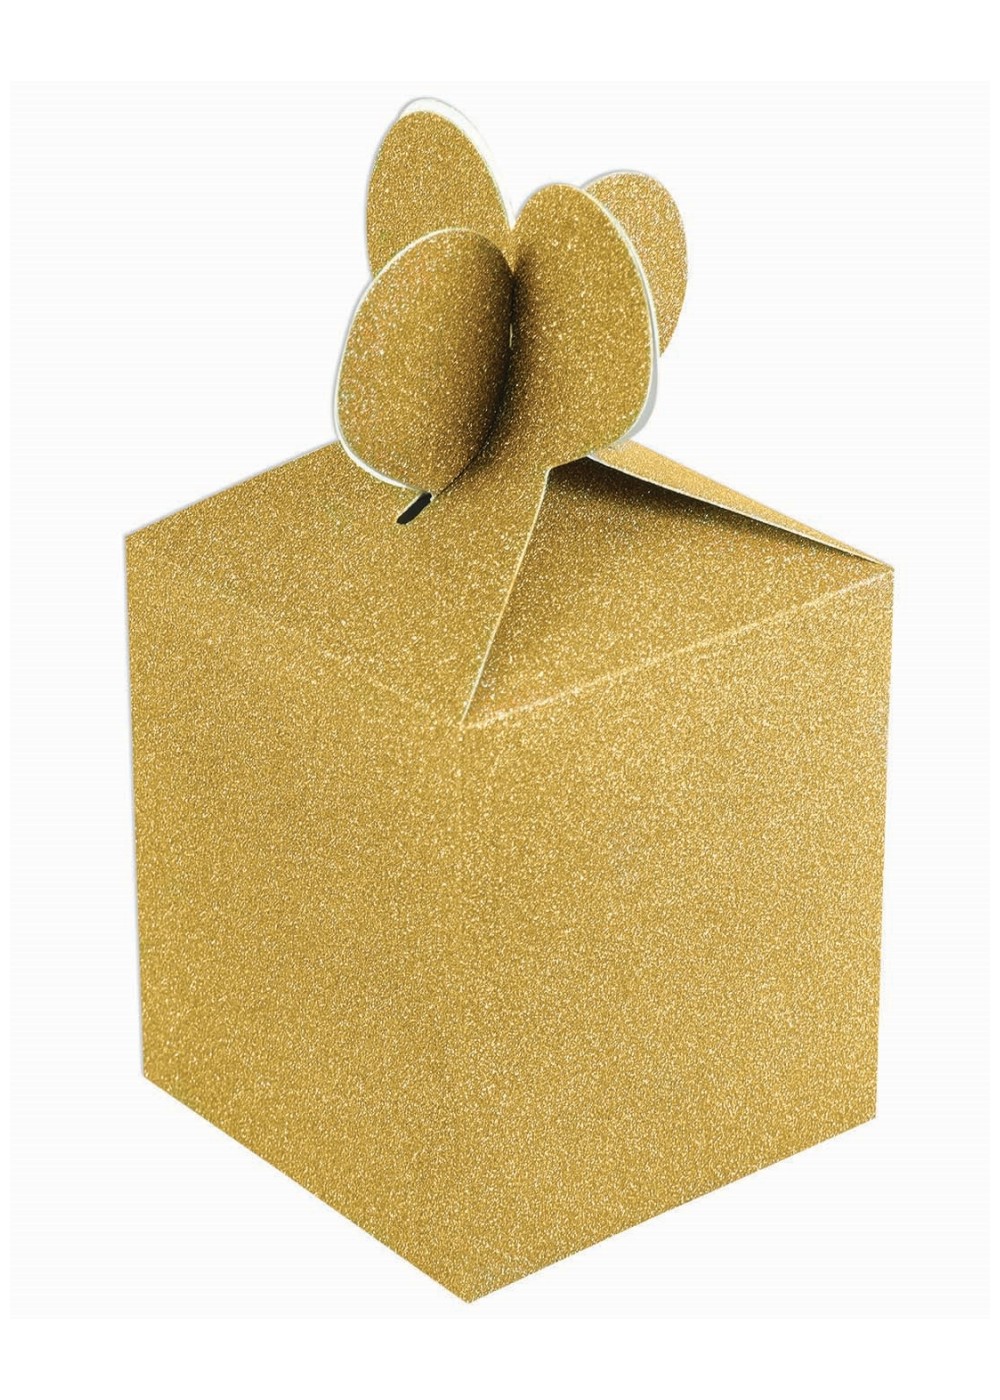 Diamond Gold Color Gift Boxes